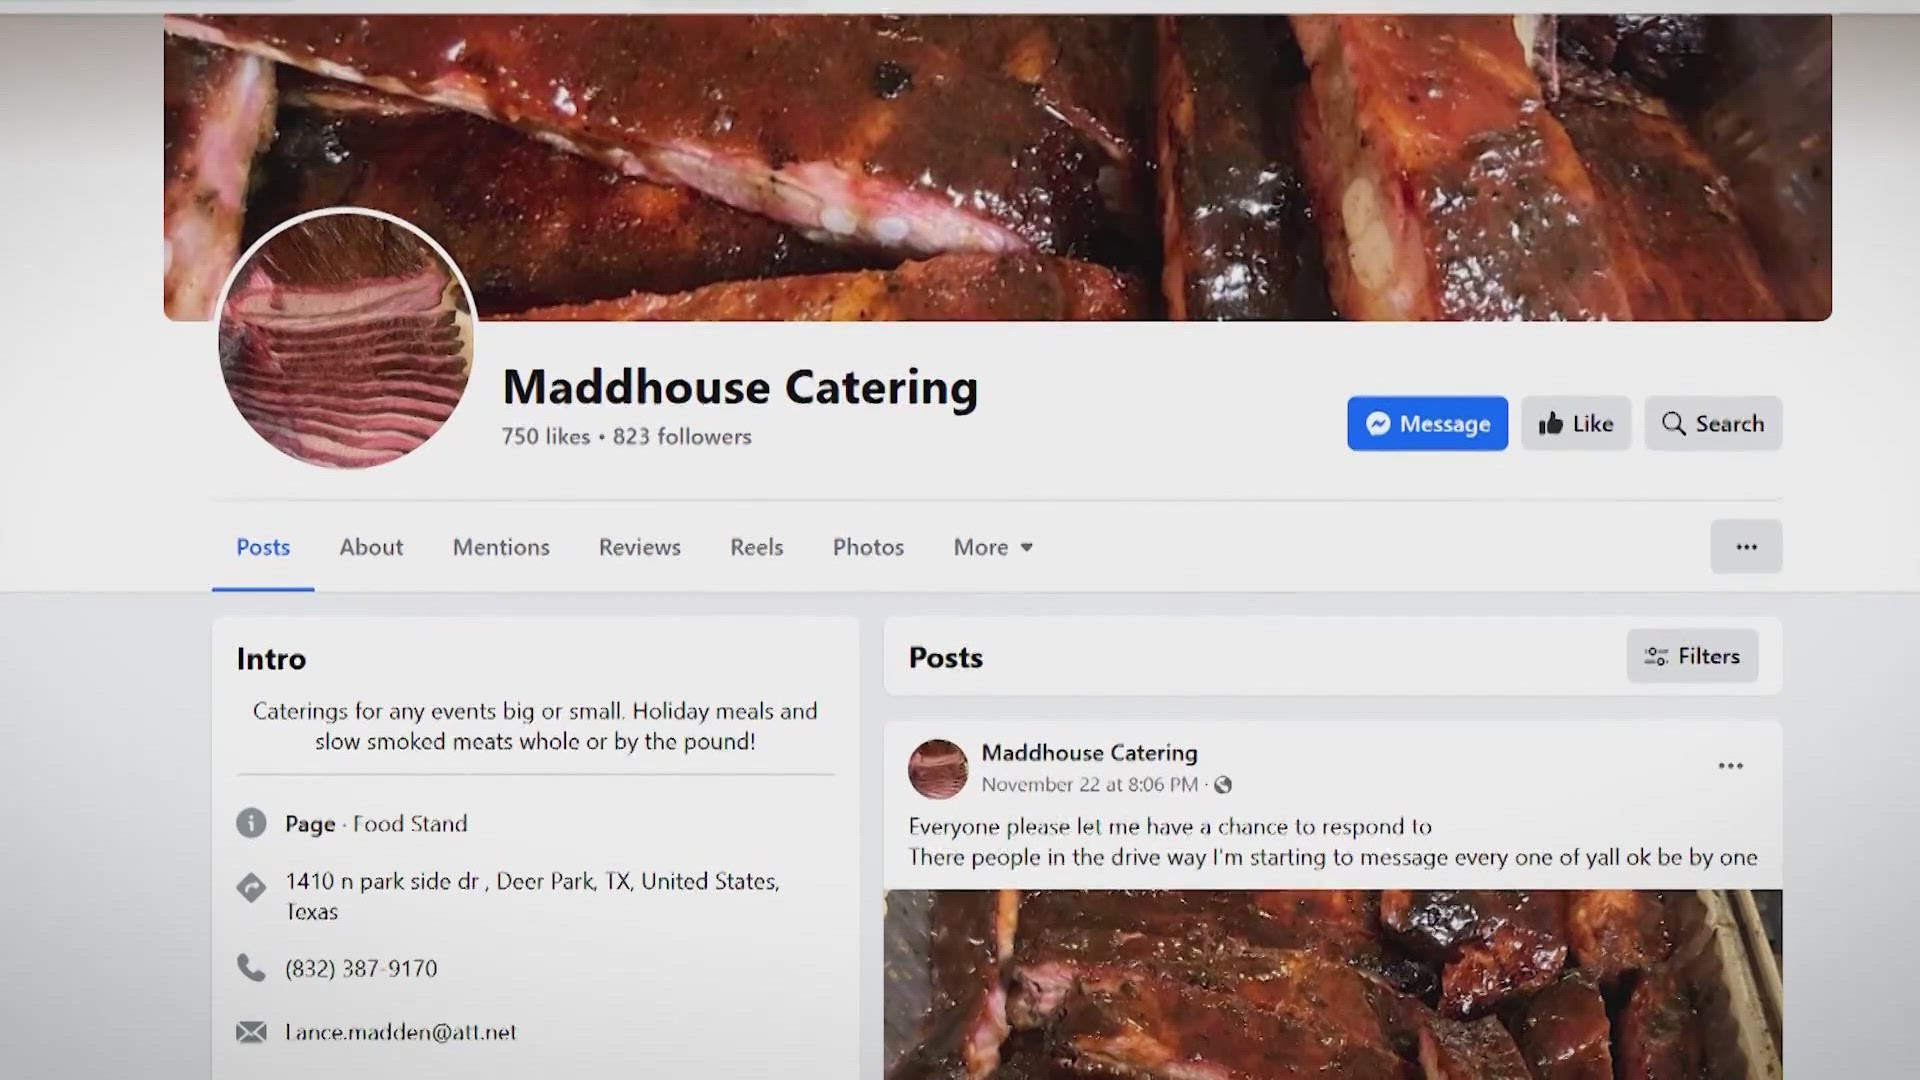 The owner of Maddhouse Catering started a charity raffle for Brayden Millon's family in August. It's now November and the family has yet to see a dime.